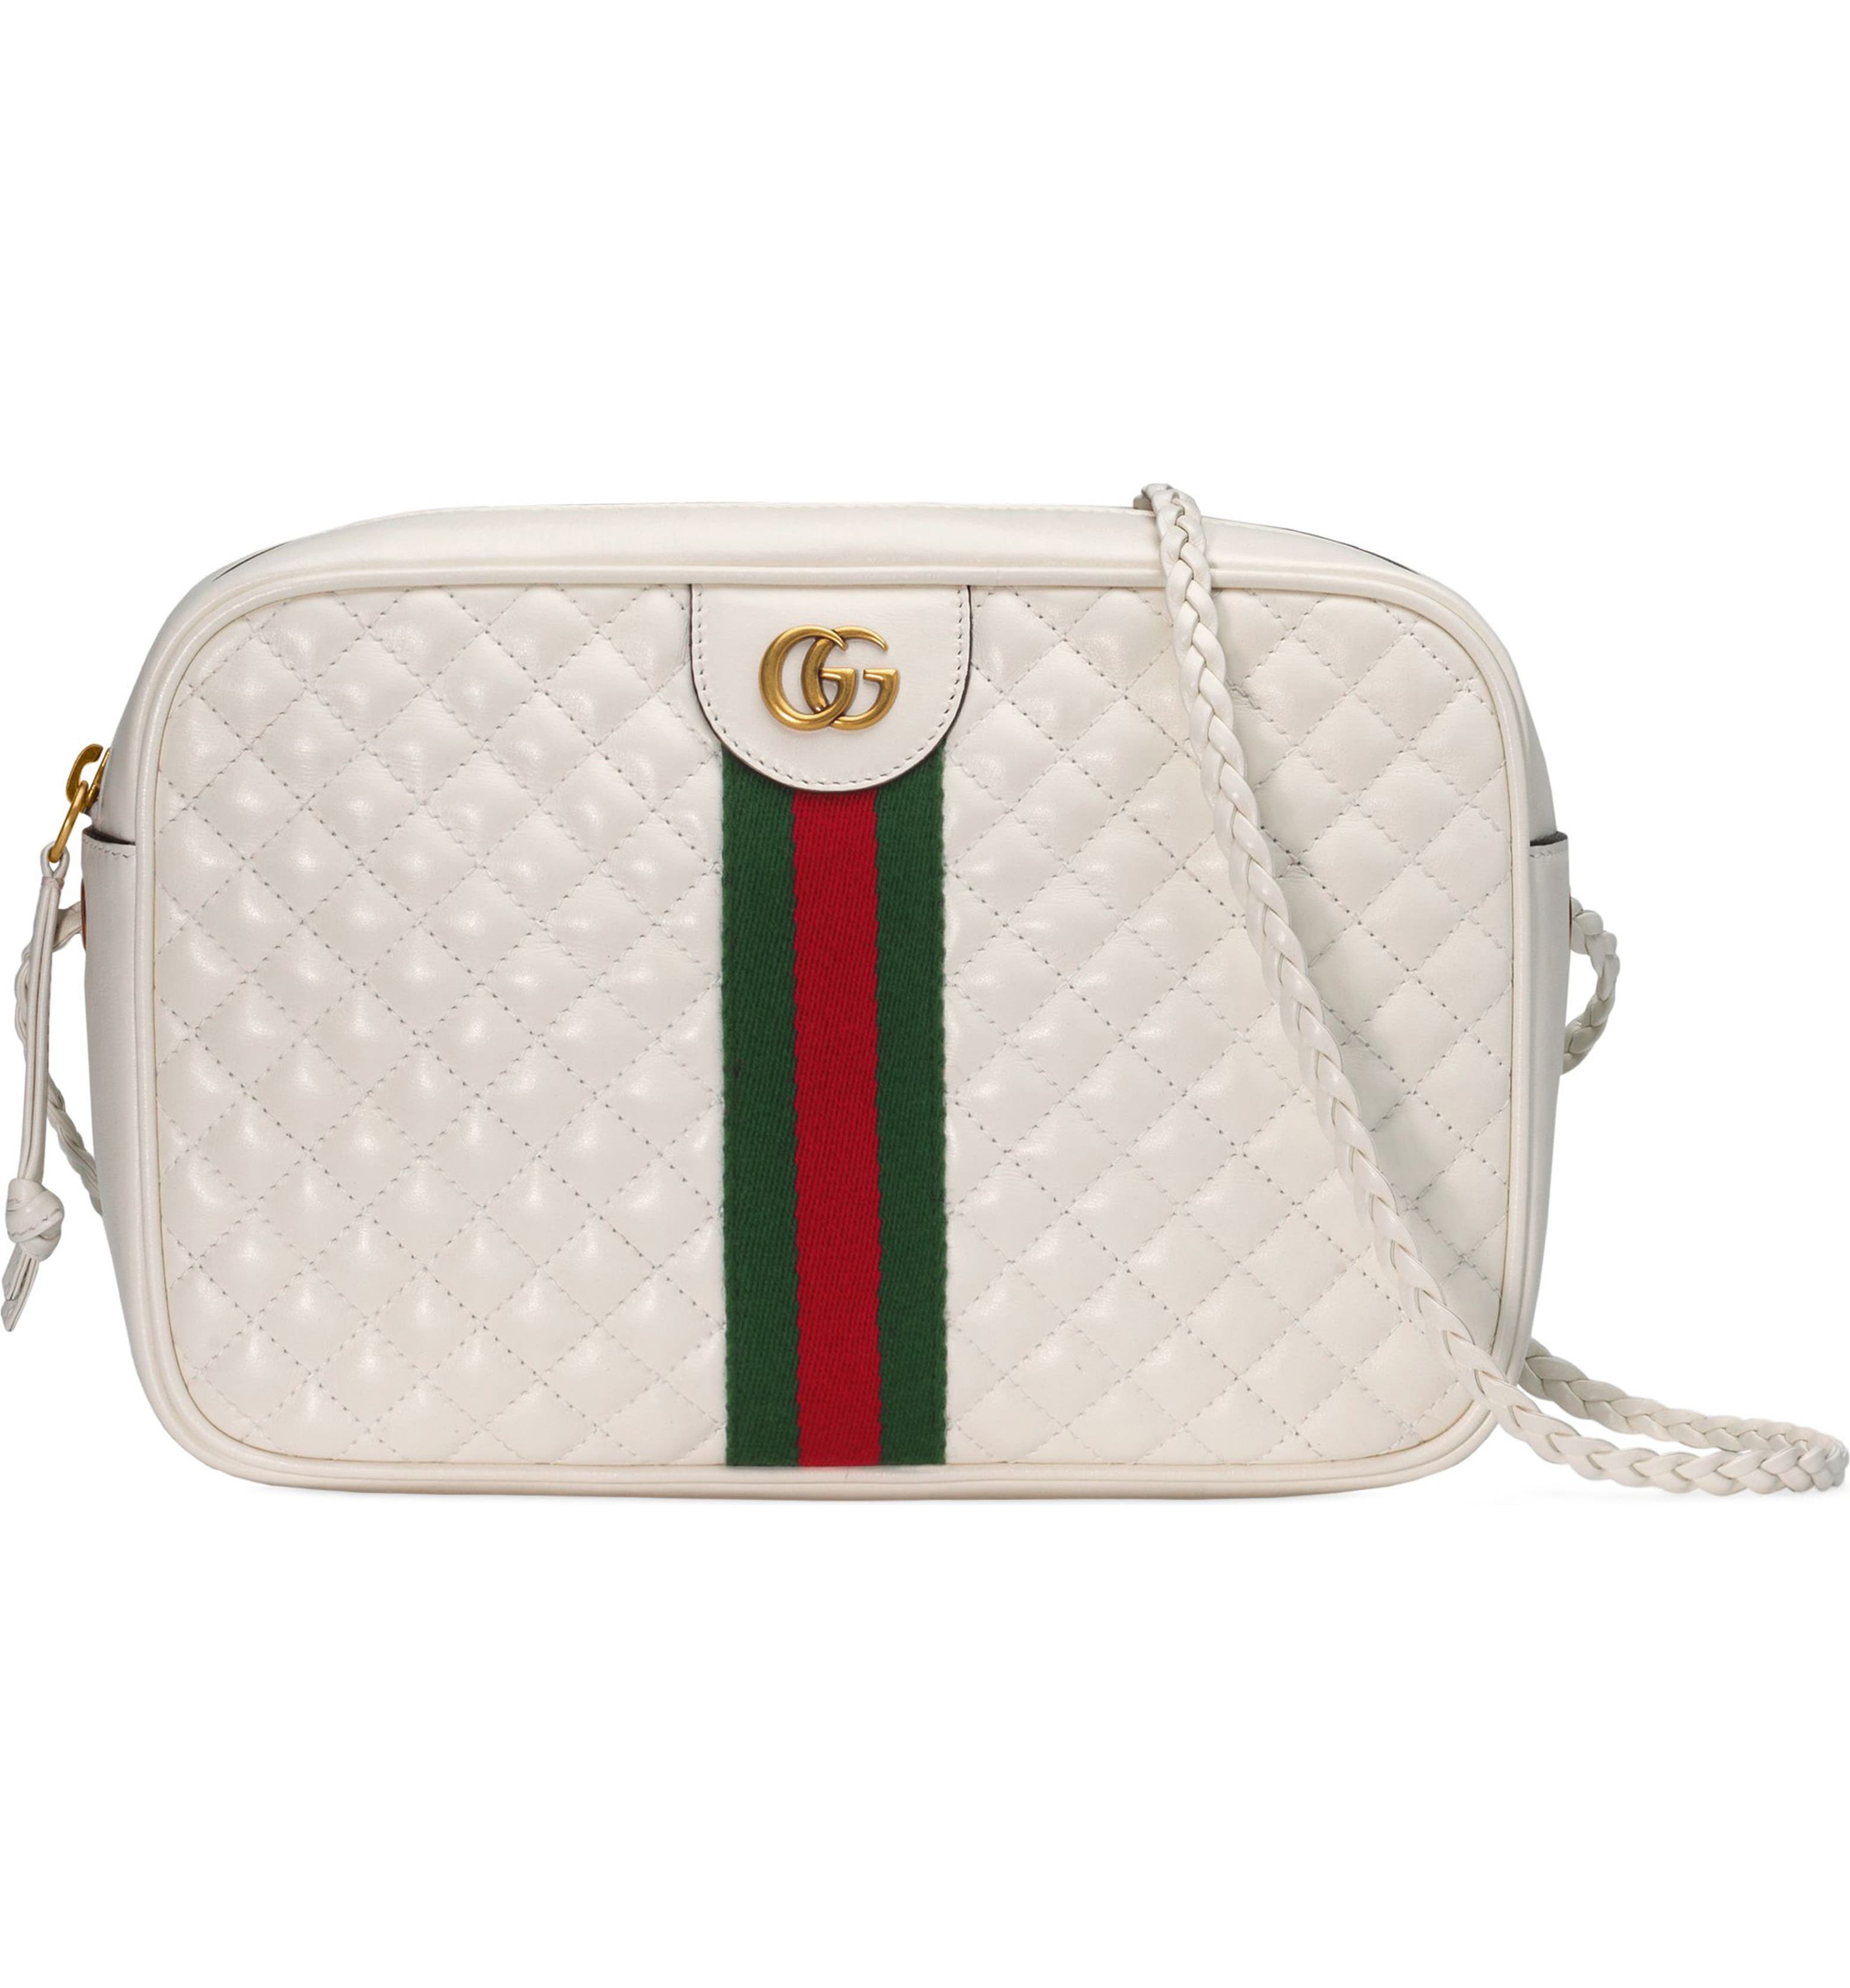 Gucci Small Quilted Leather Camera Bag | Nordstrom